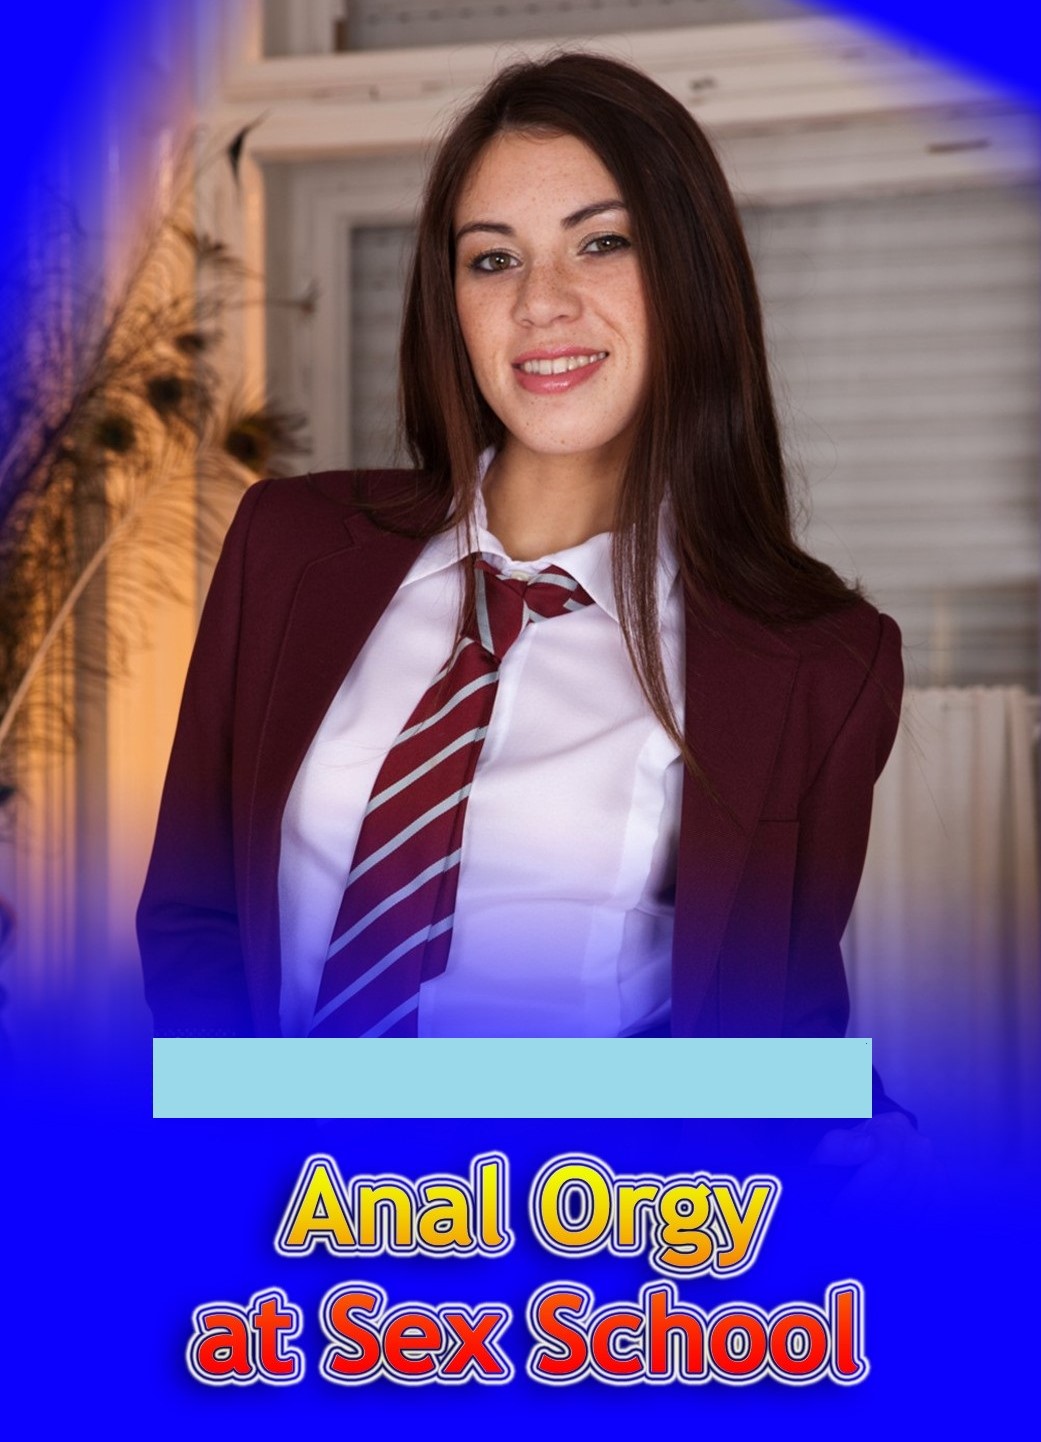 You are currently viewing Anal Orgy at Sex School 2021 Private Adult Video 720p HDRip 500MB Download & Watch Online